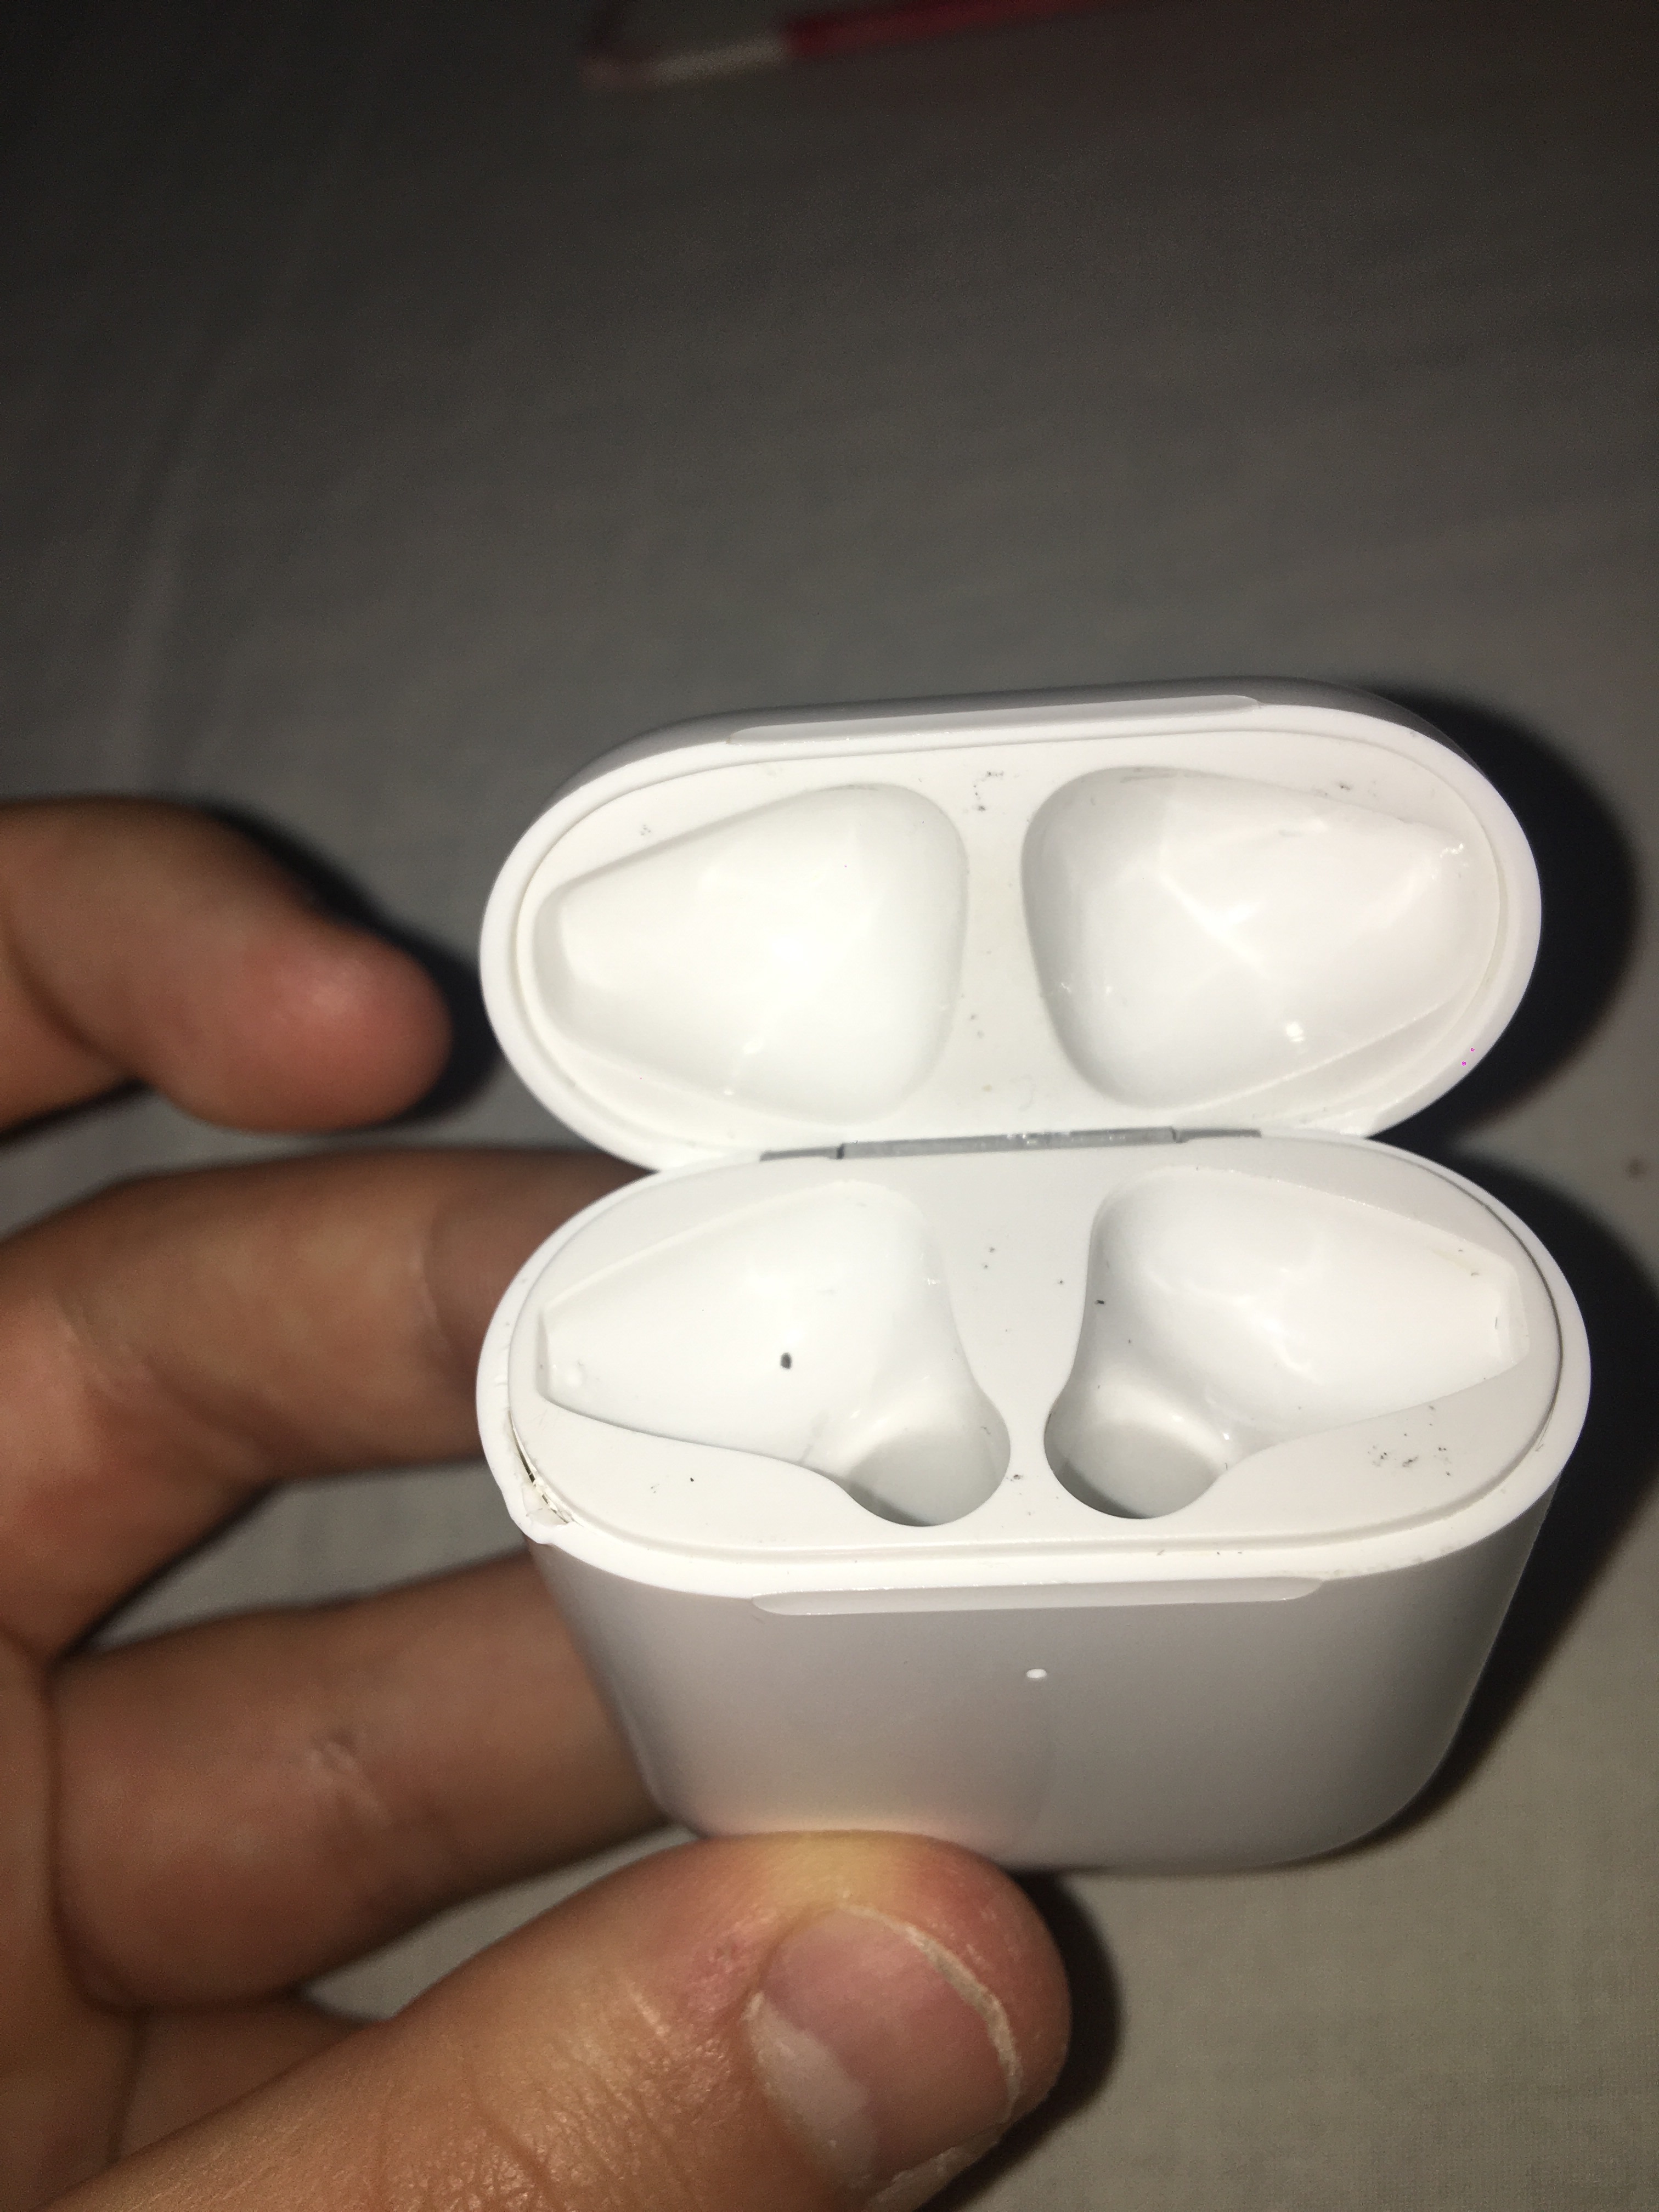 Is it normal? AirPods Pro plastic cracked - Apple Community